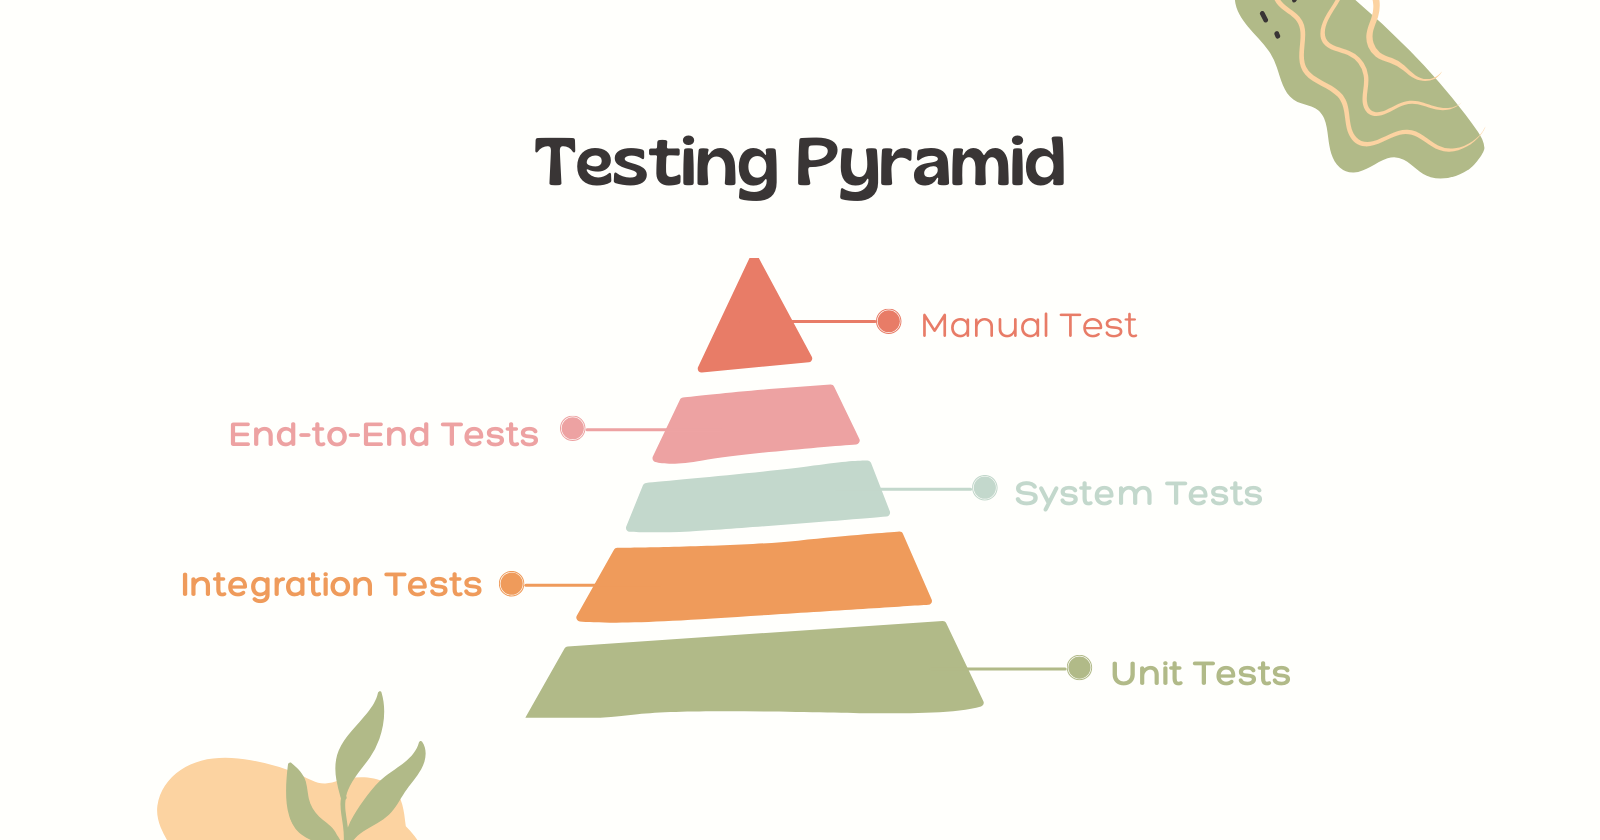 Graphic of the Testing Pyramid in modern software development.